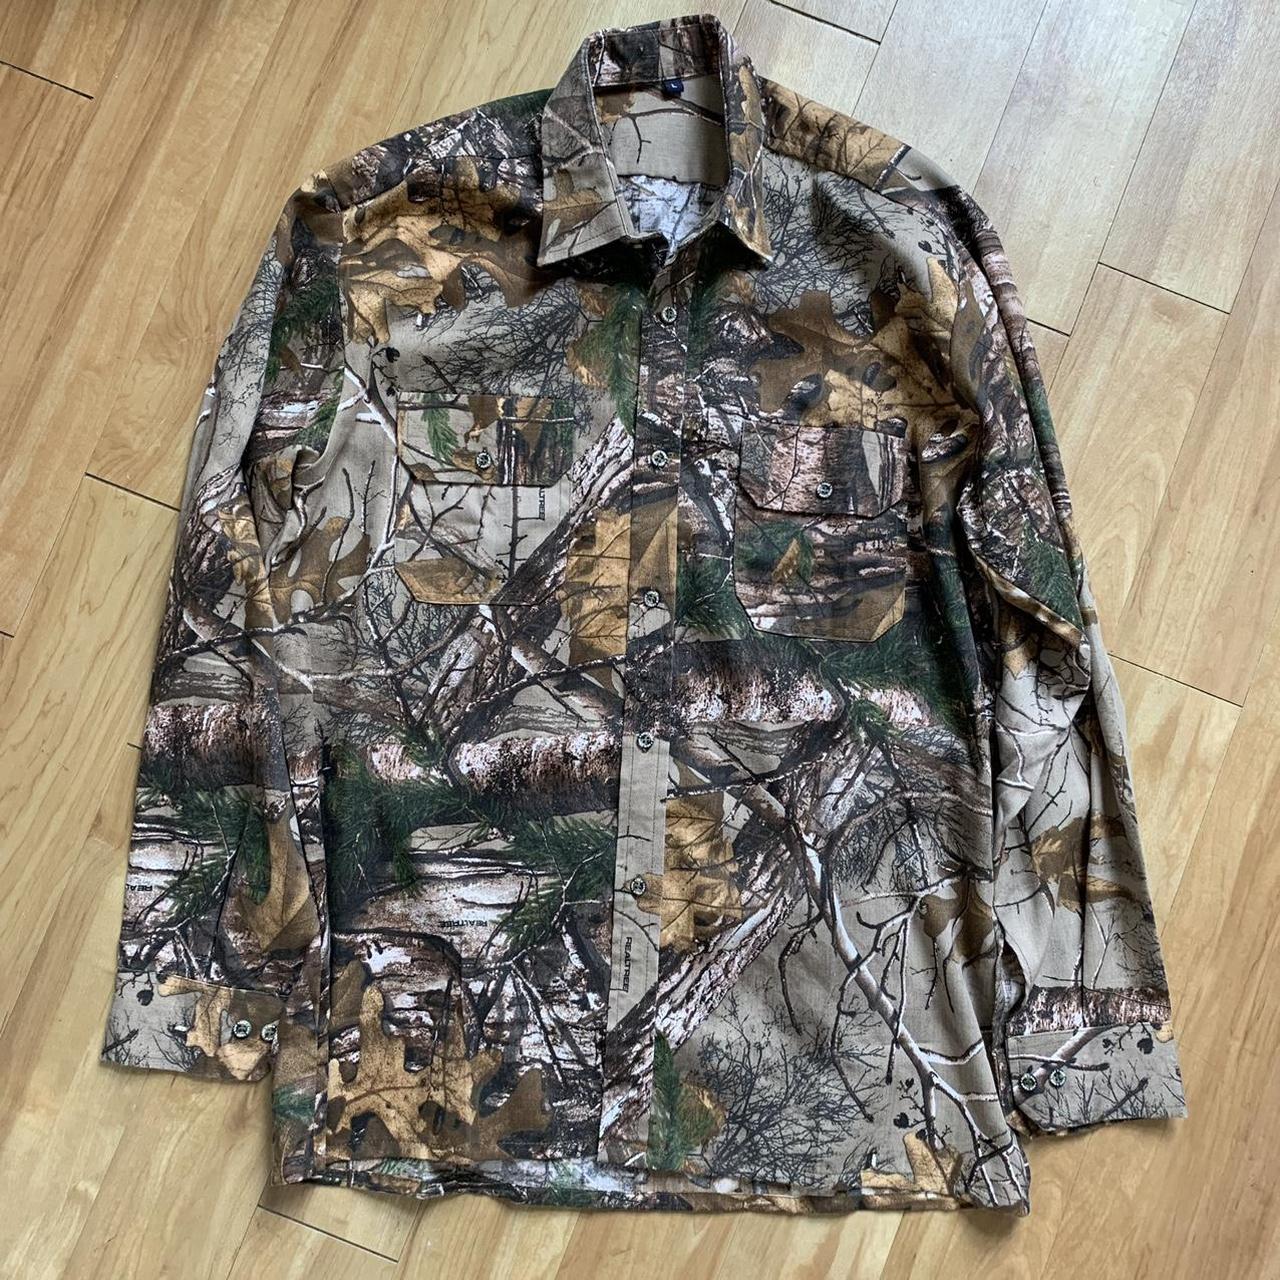 Realtree camo shirt in large, great condition and... - Depop